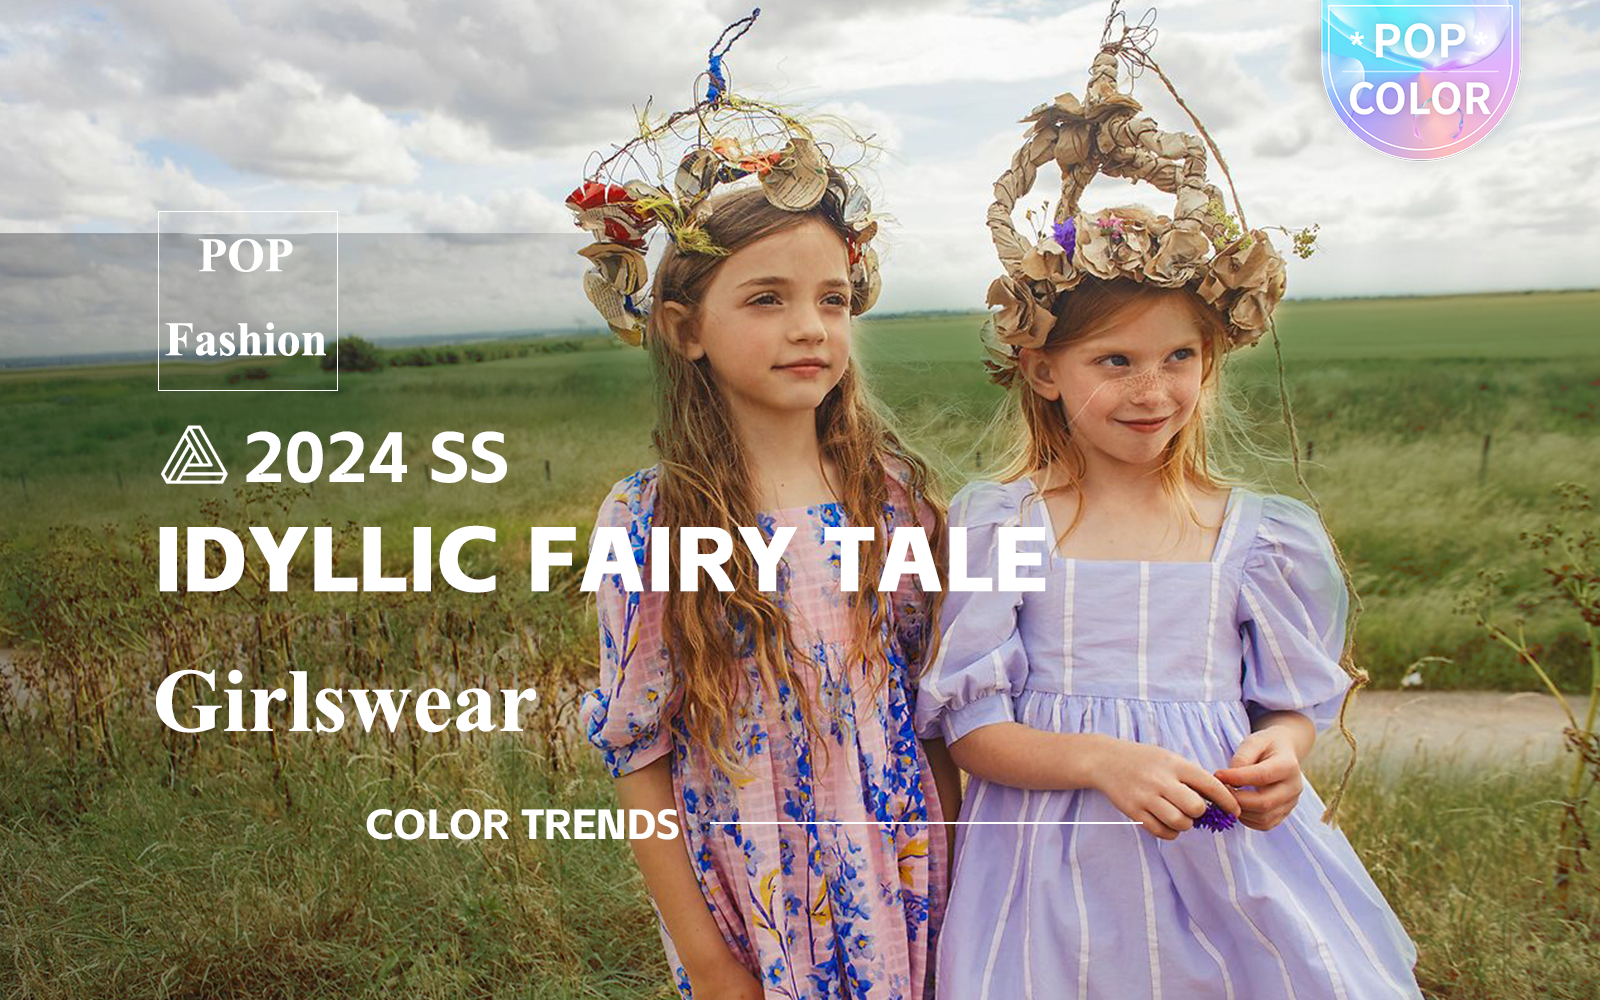 Idyllic Fairy Tale -- The Color Trend for Girlswear